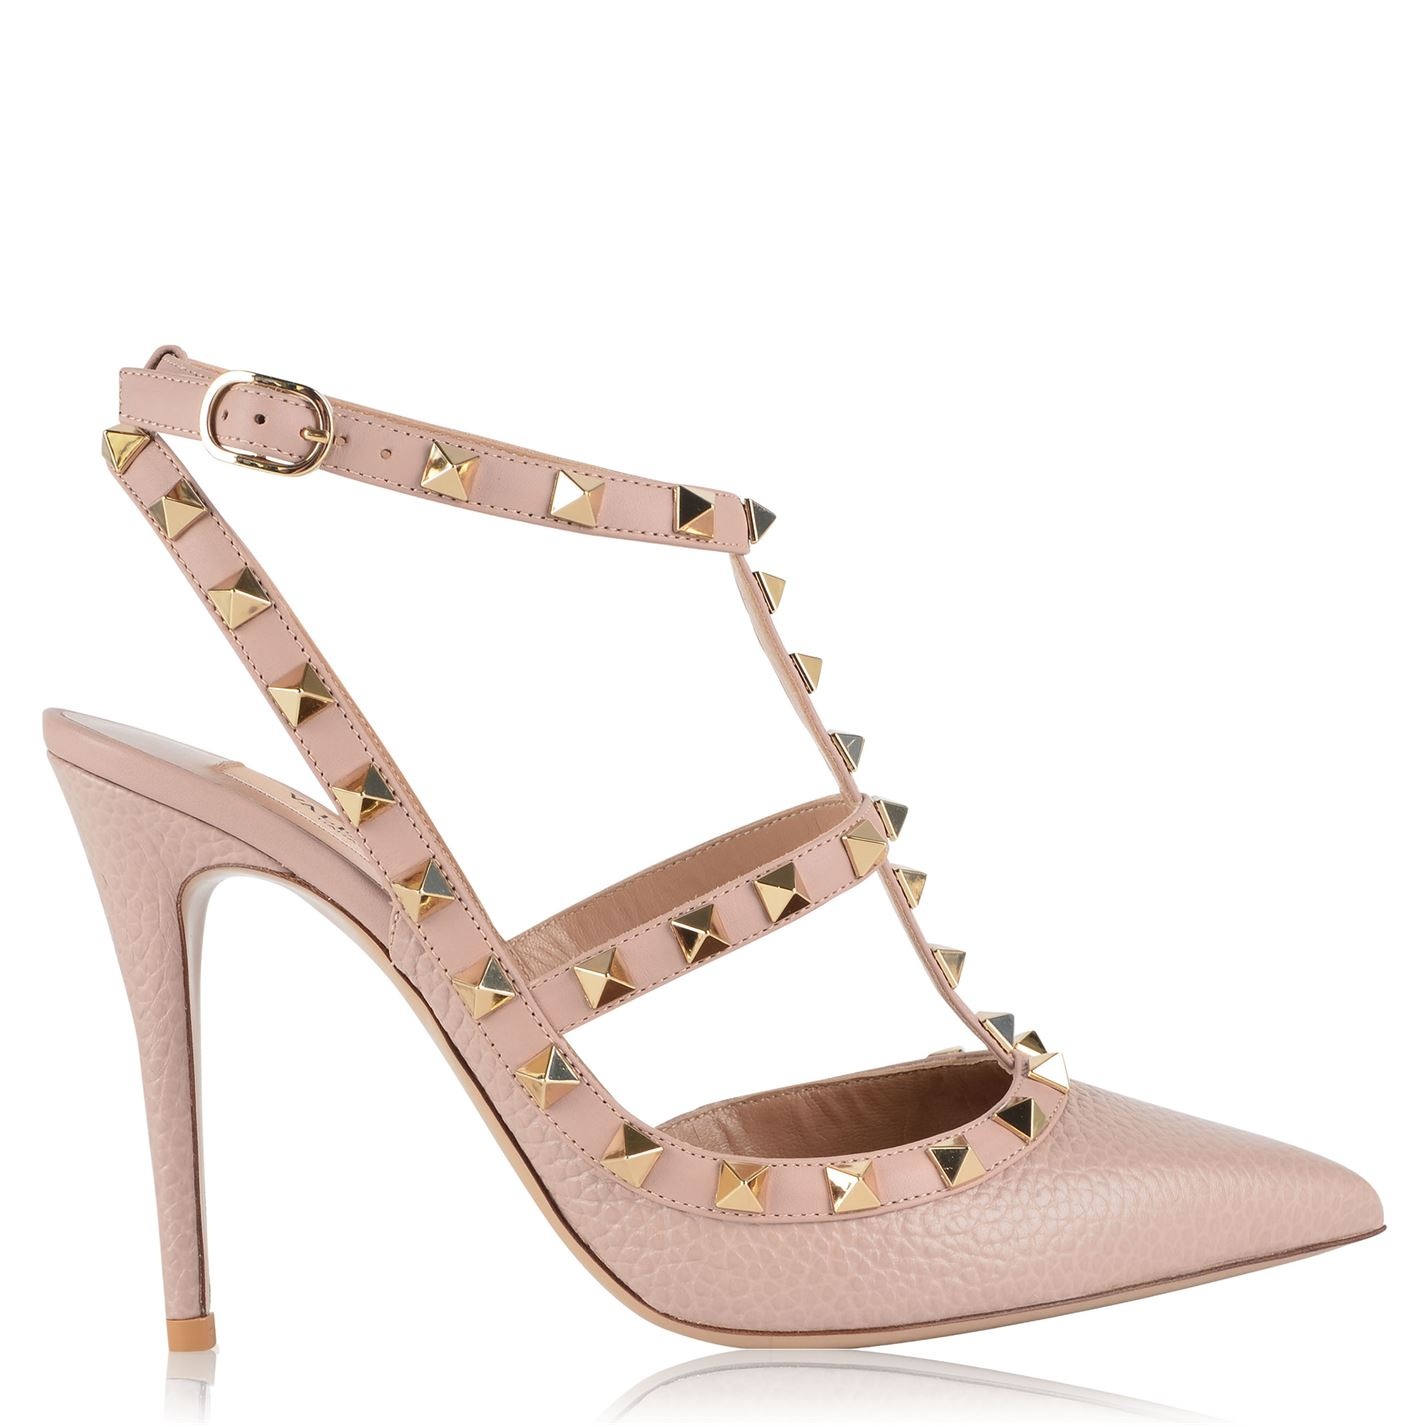 ROCKSTUD PUMPS IN GRAINED LEATHER - 1